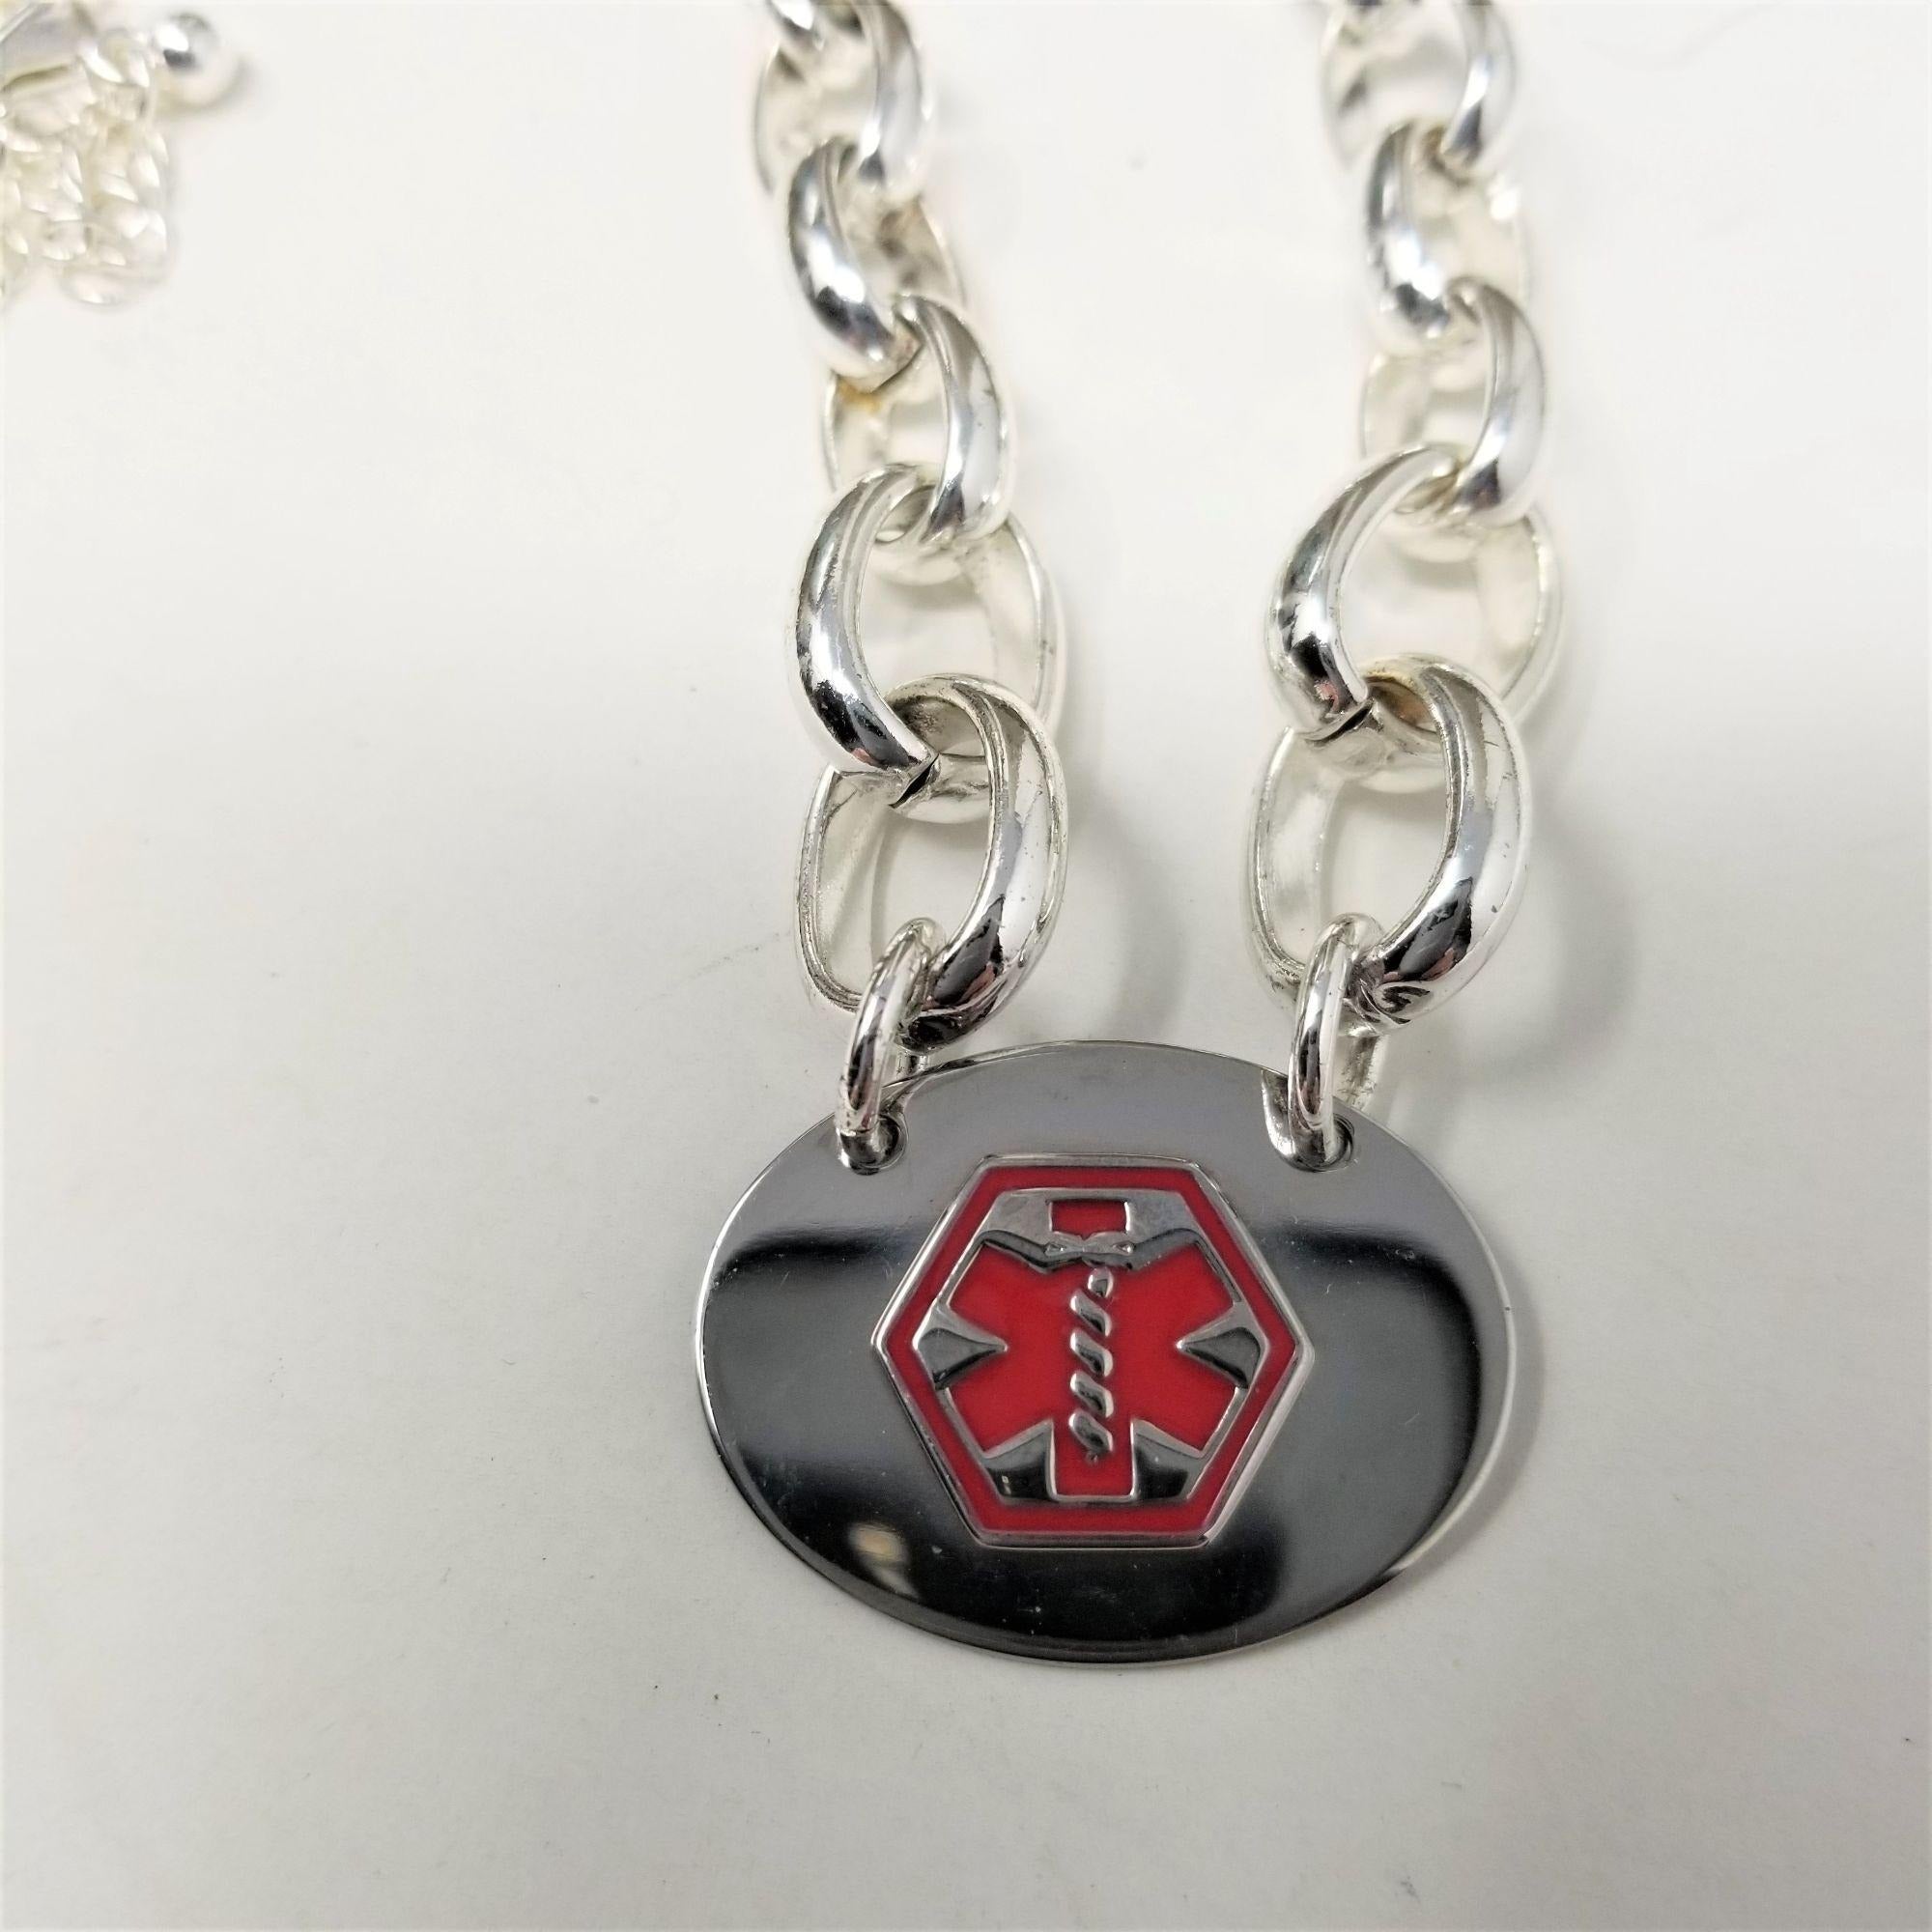 Medical Alert Silver Necklace Diabetic Chain Link